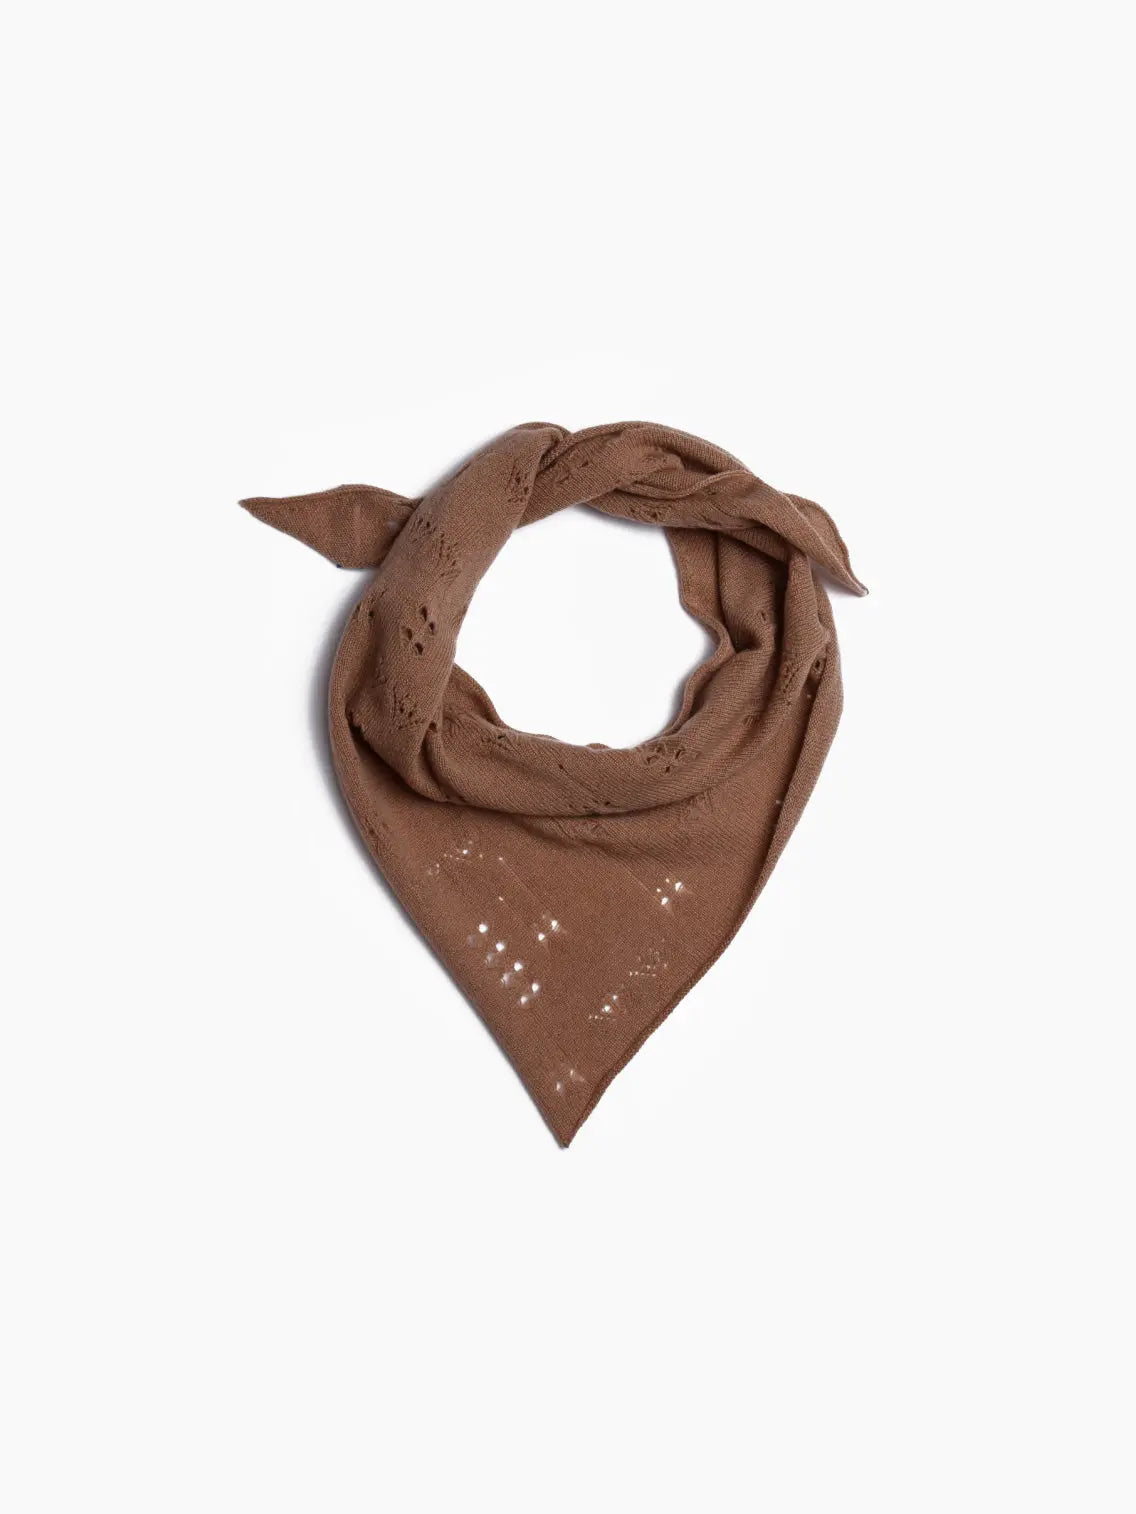 A brown, knitted bandana with a folded and tied design, featuring subtle, decorative eyelet patterns. The fabric has a soft texture, and the bandana is displayed on a plain, light background. Find this unique piece at our bassalstore in Barcelona, the Tar Mini Scarf Taupe by Bielo.